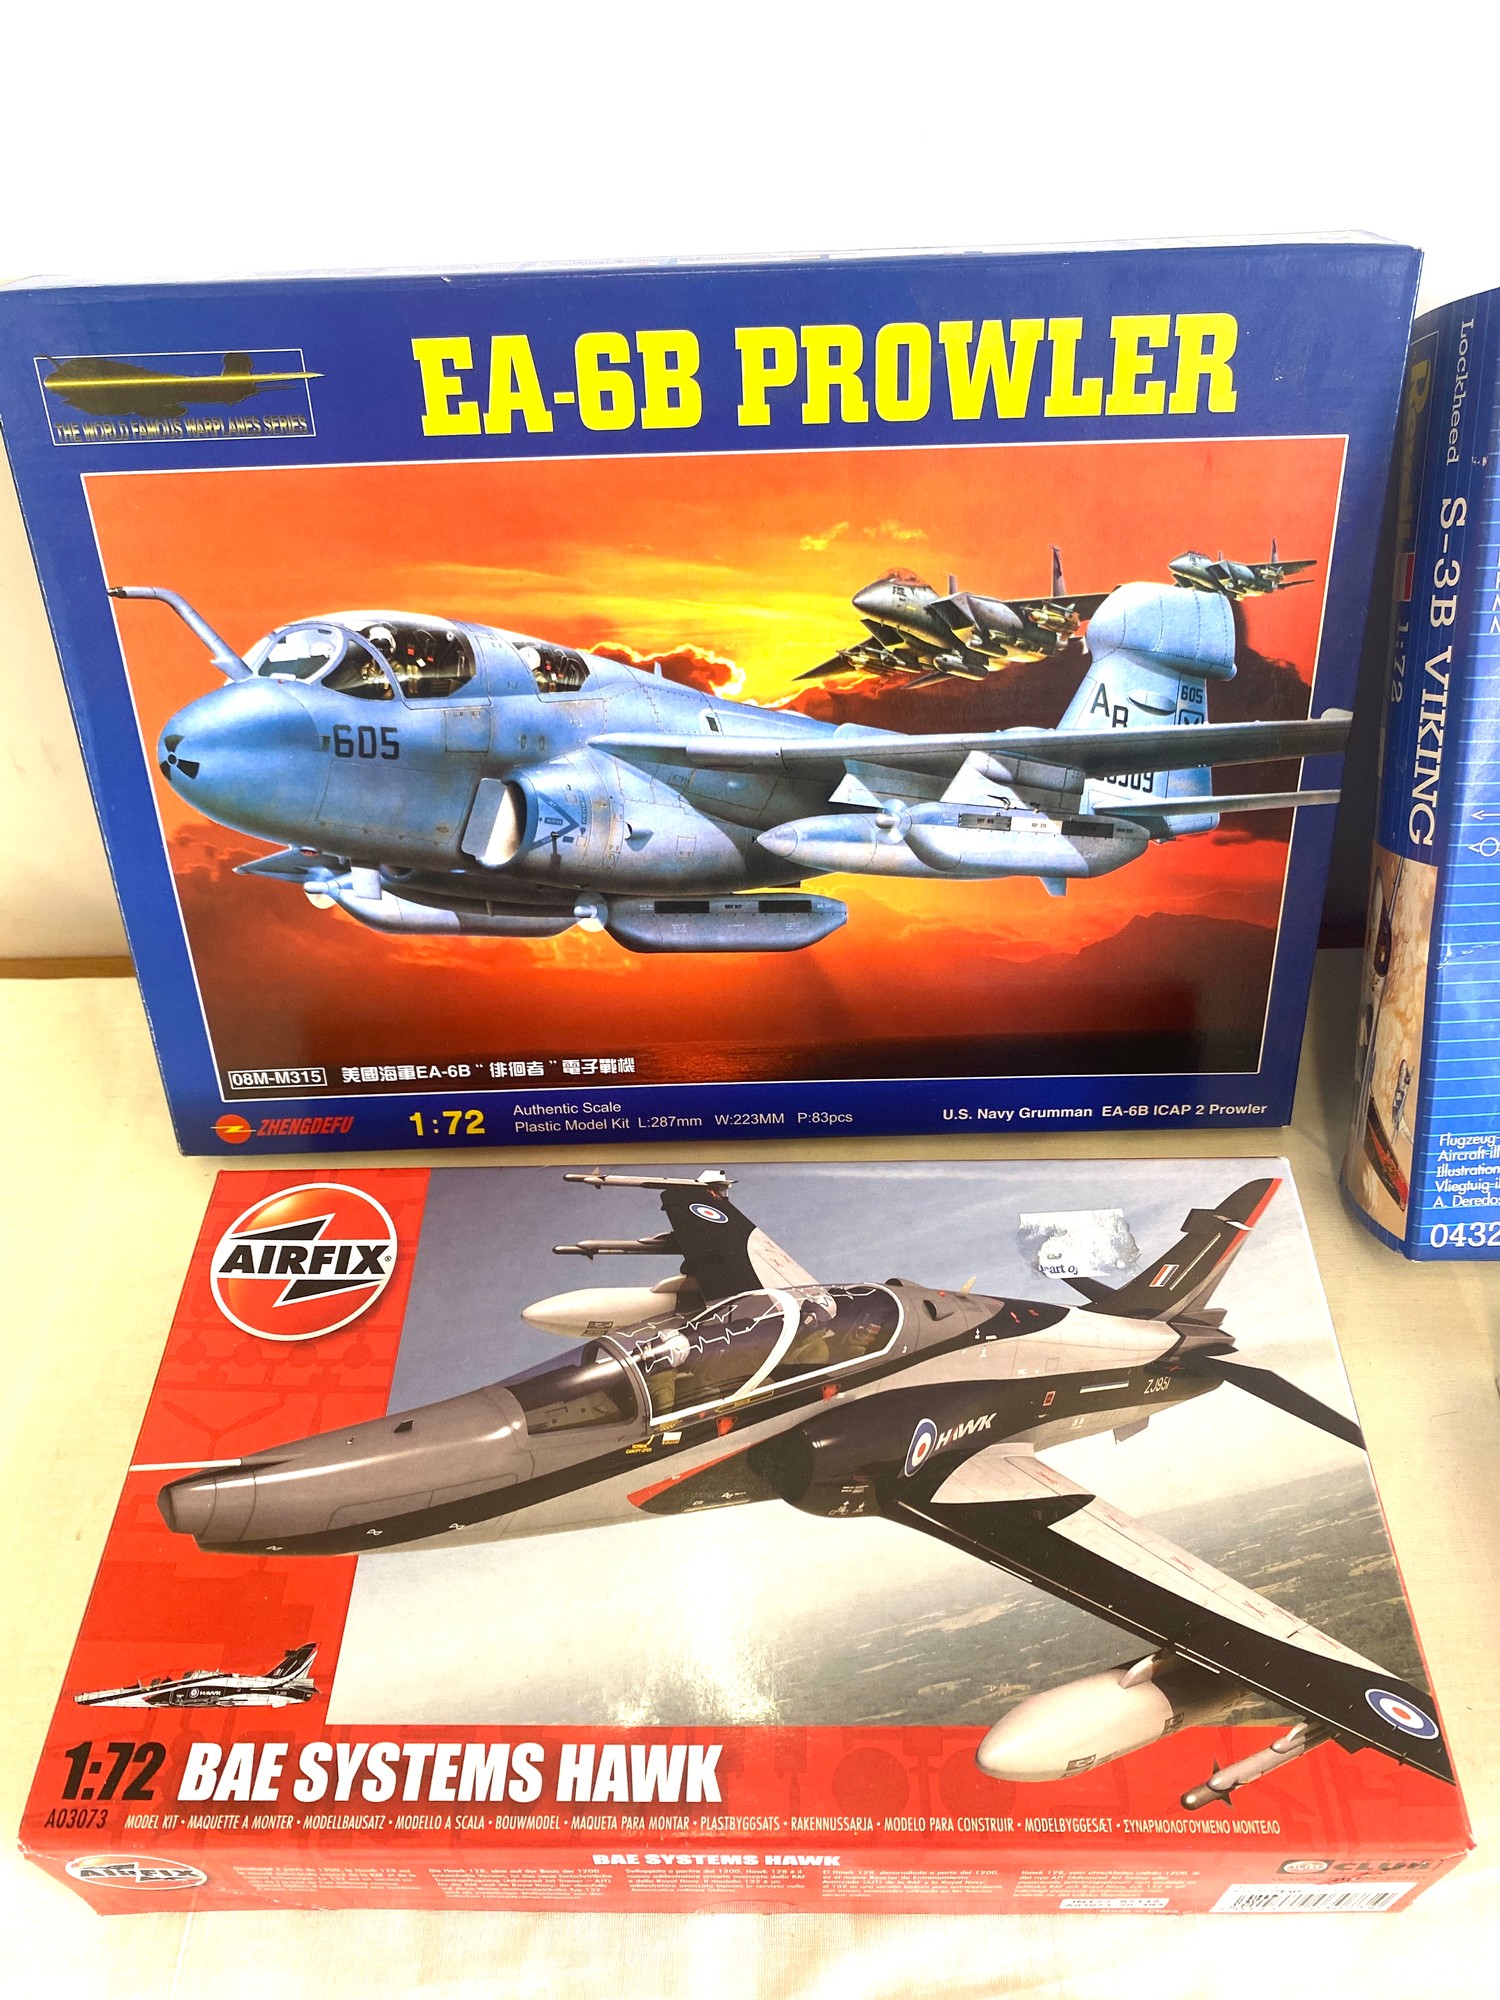 Selection of 4 boxed model air crafts includes, Ea-6B Prowler, Airfix Bae System Hawk, Revell - Bild 3 aus 3